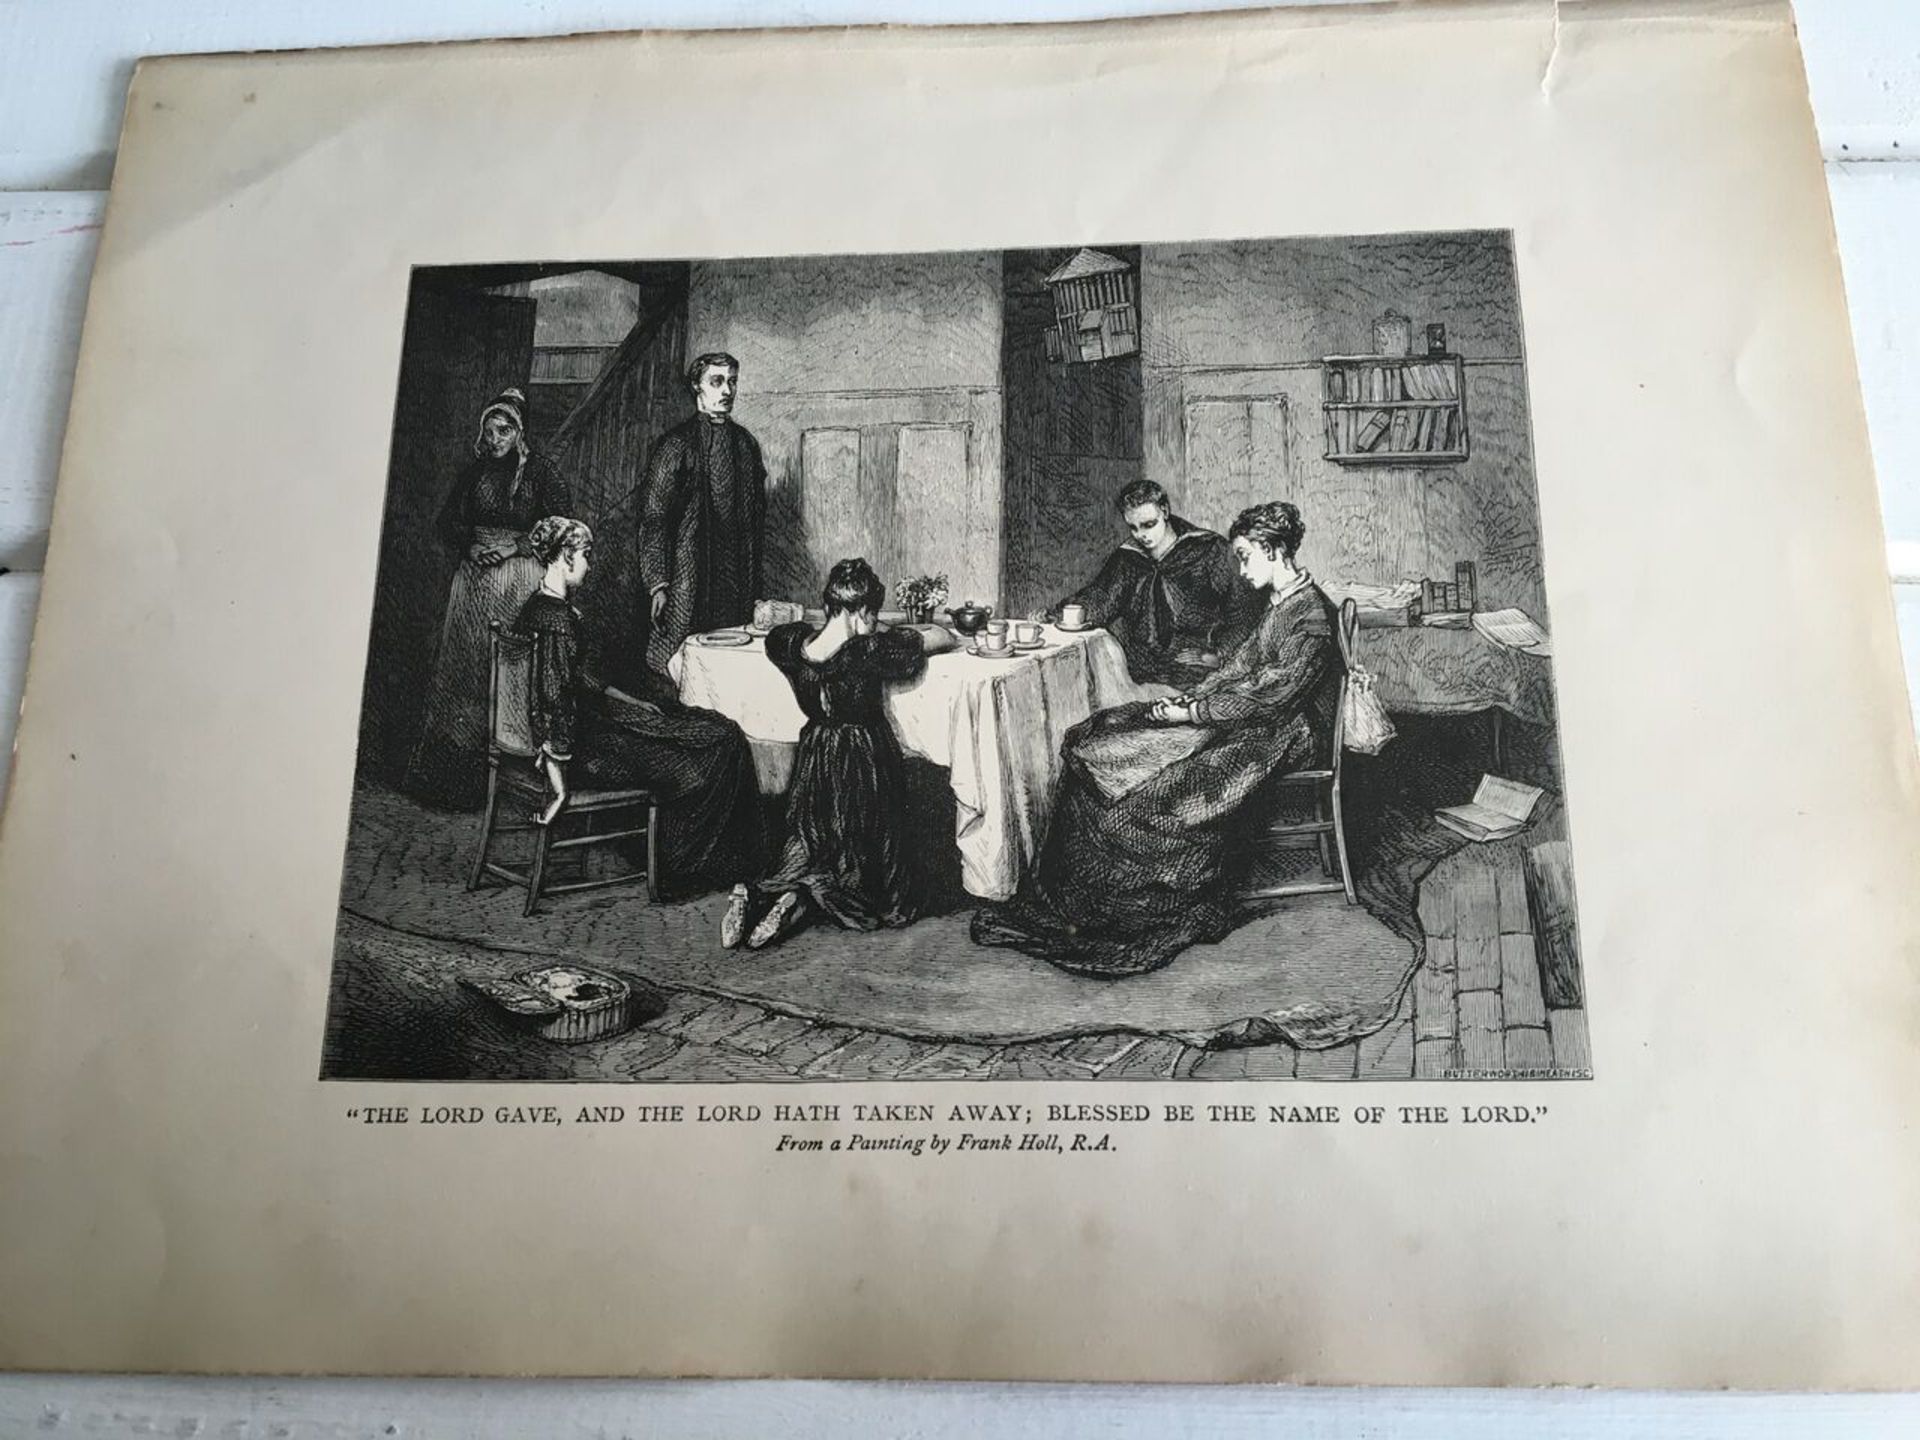 AN ENGRAVING c1900 OF A PAINTING BY FRANK HOLL (1845 - 1888 ). "THE LORD GAVE, AND THE LORD HATH